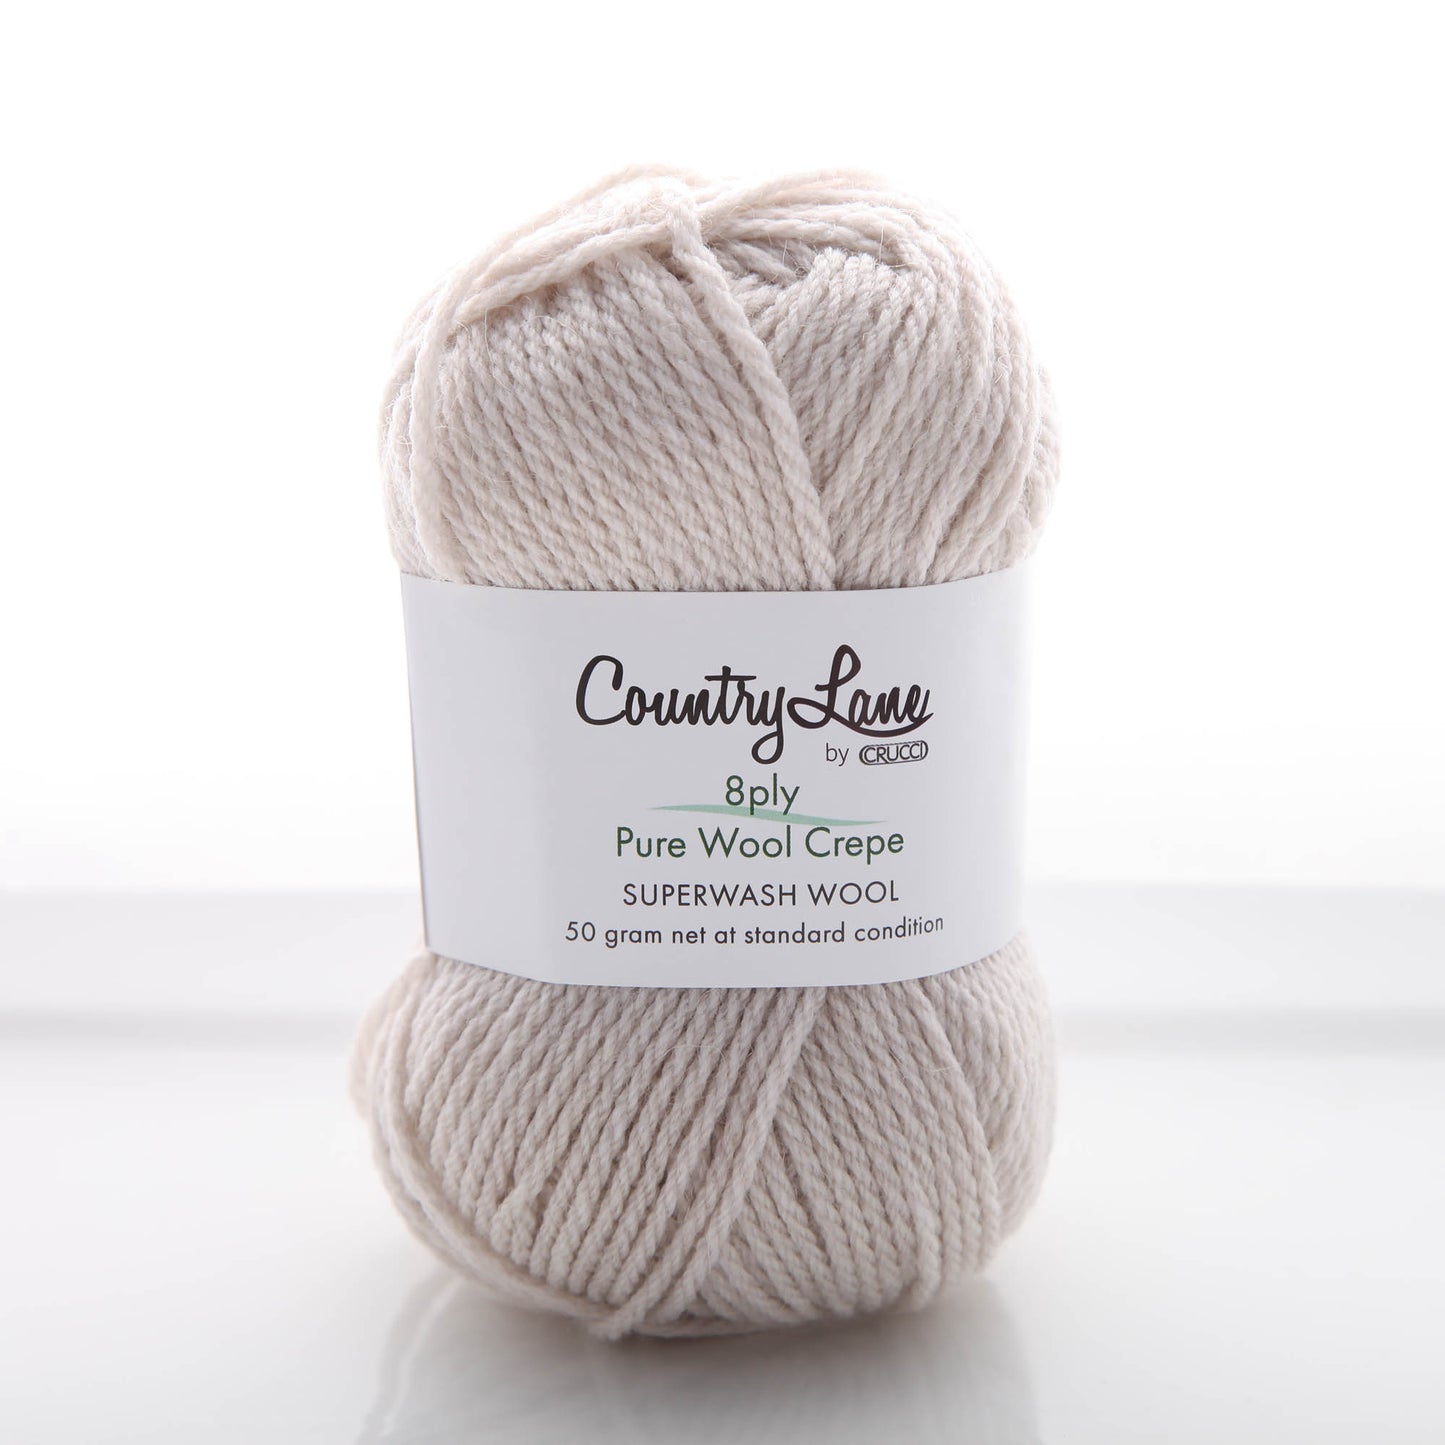 Country Lane Pure Wool Crepe 8 ply